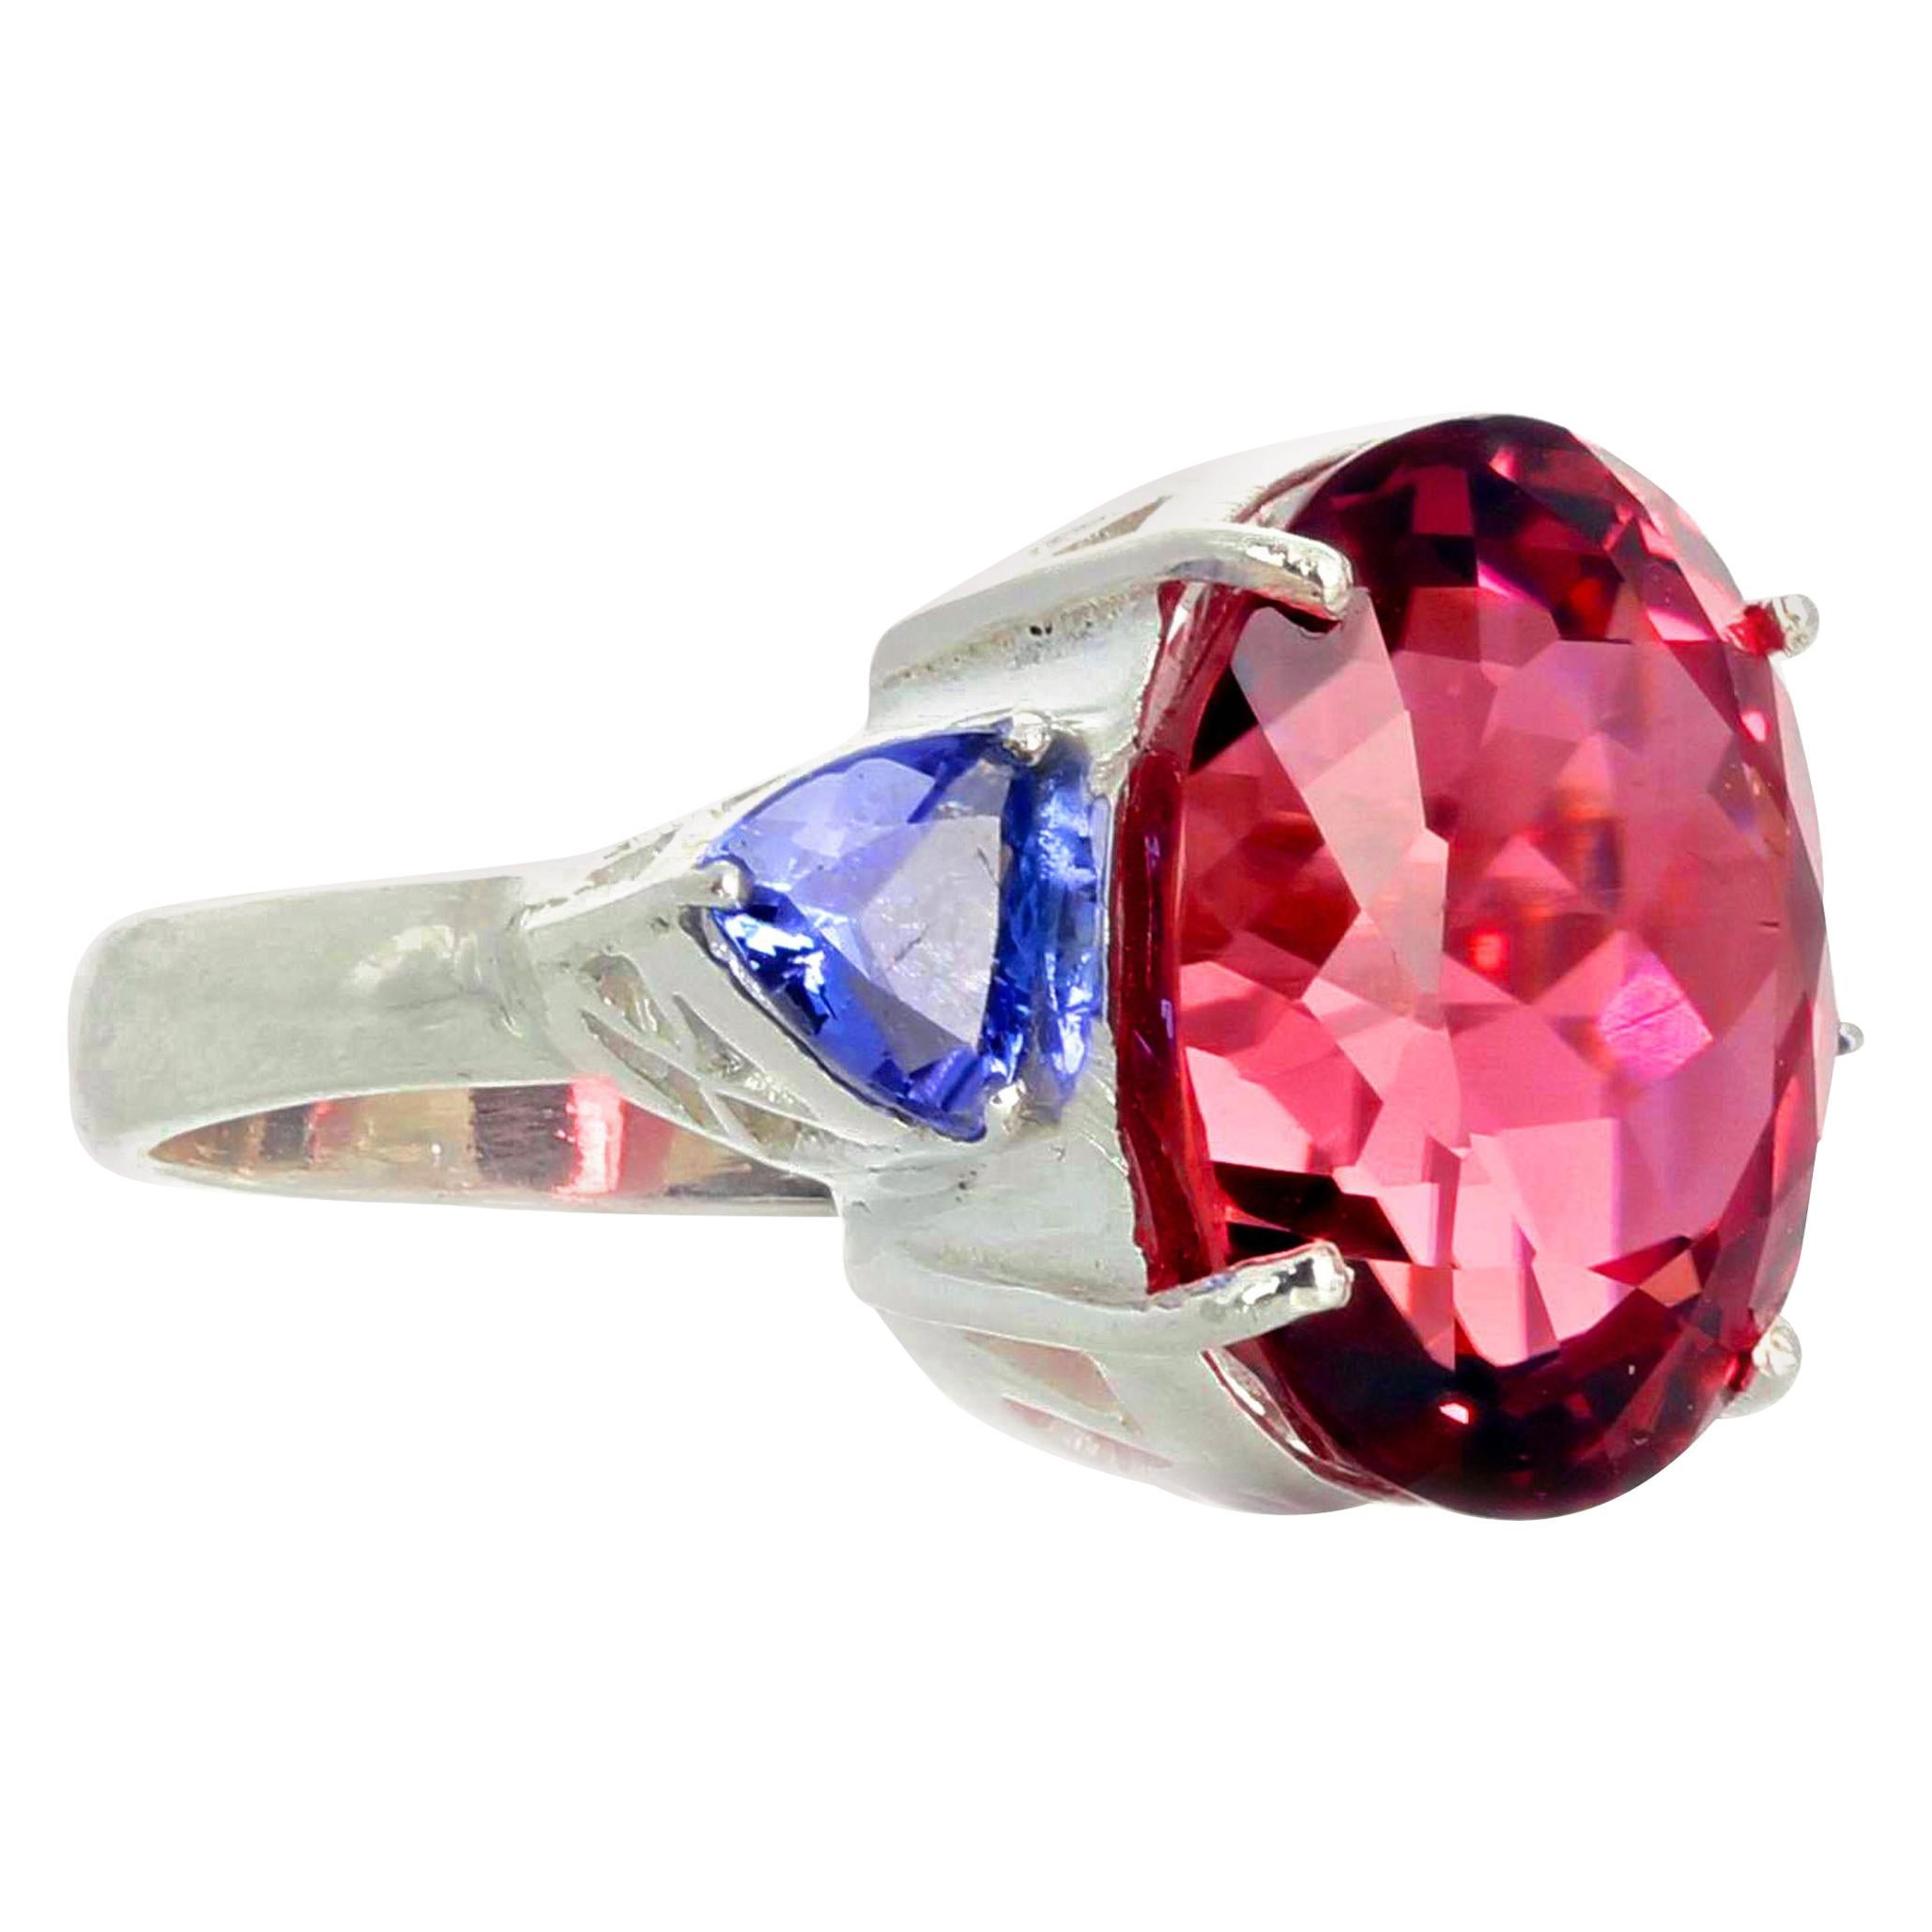 AJD Amazingly Intensely Pink 15.7 Carat "no inclusions"Tourmaline&Tanzanite Ring